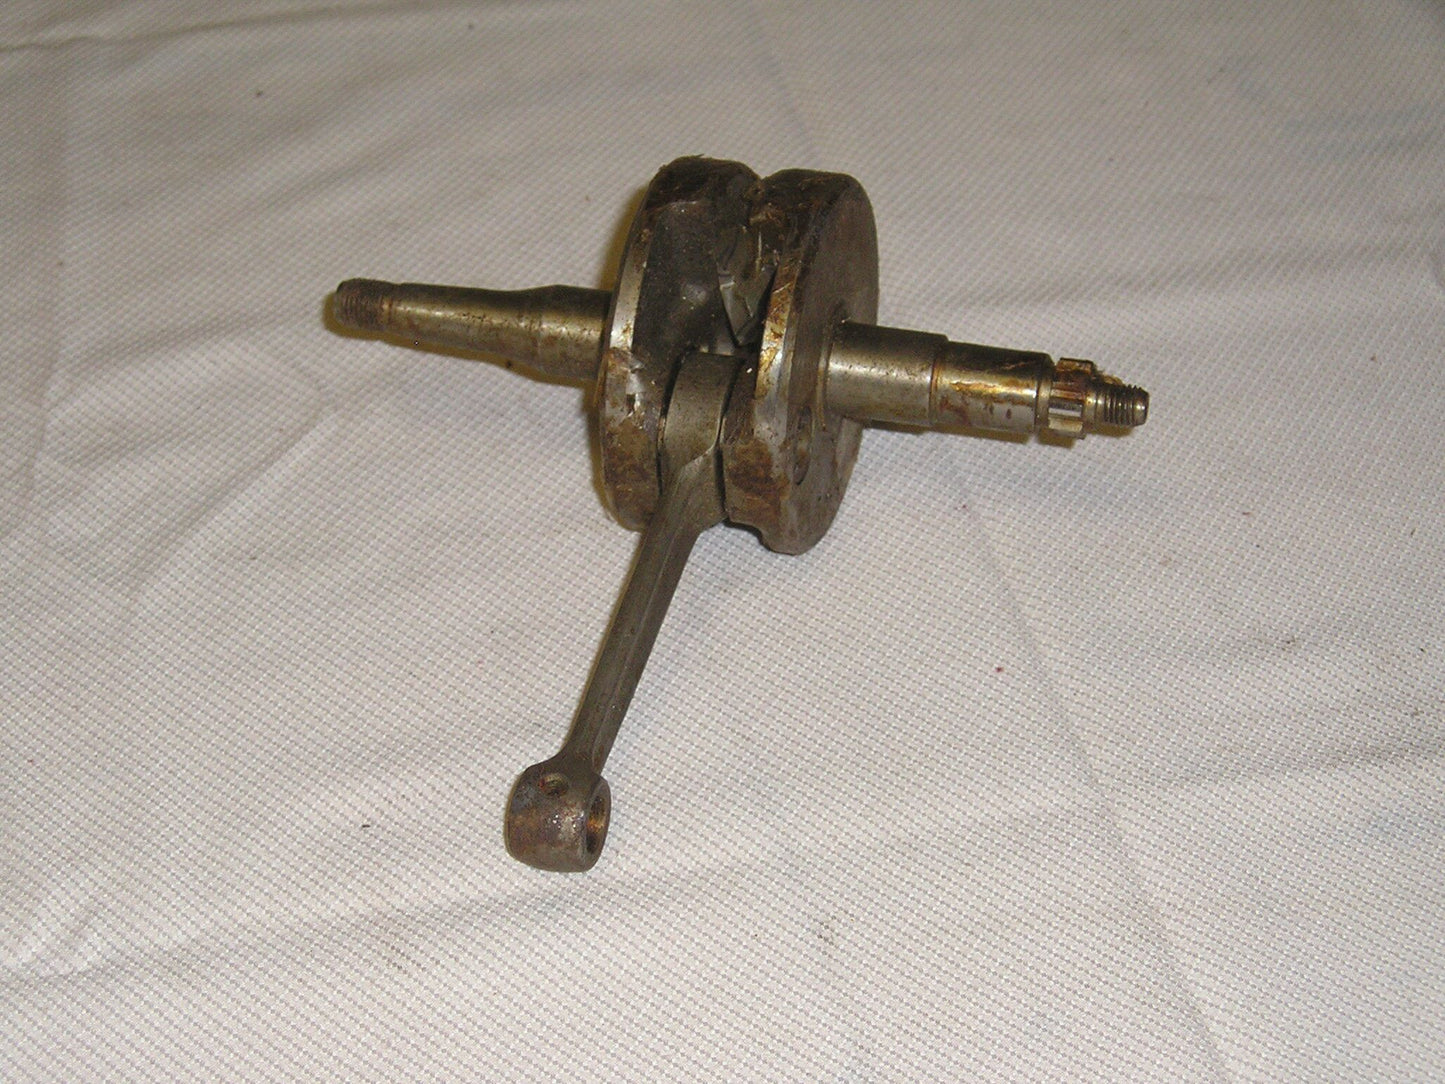 PUCH SEARS Moped / Motorcycle Engine Crankshaft Assembly